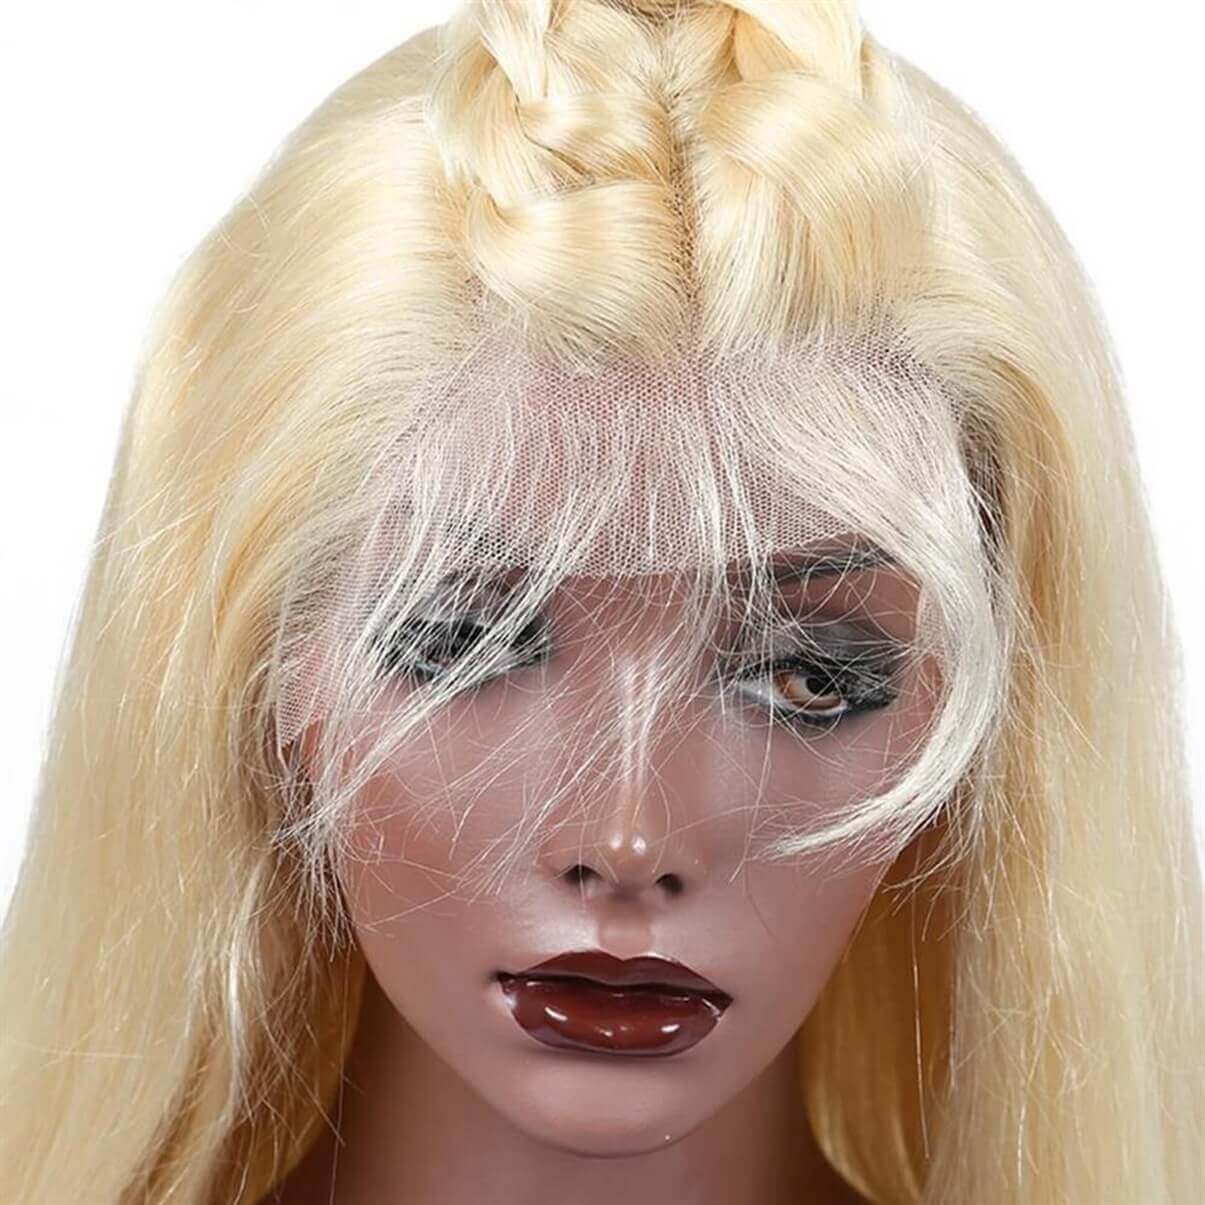 Lakihair 613 Blonde Body Wave Lace Wigs Pre Plucked Glueless Lace Front Human Hair Wigs